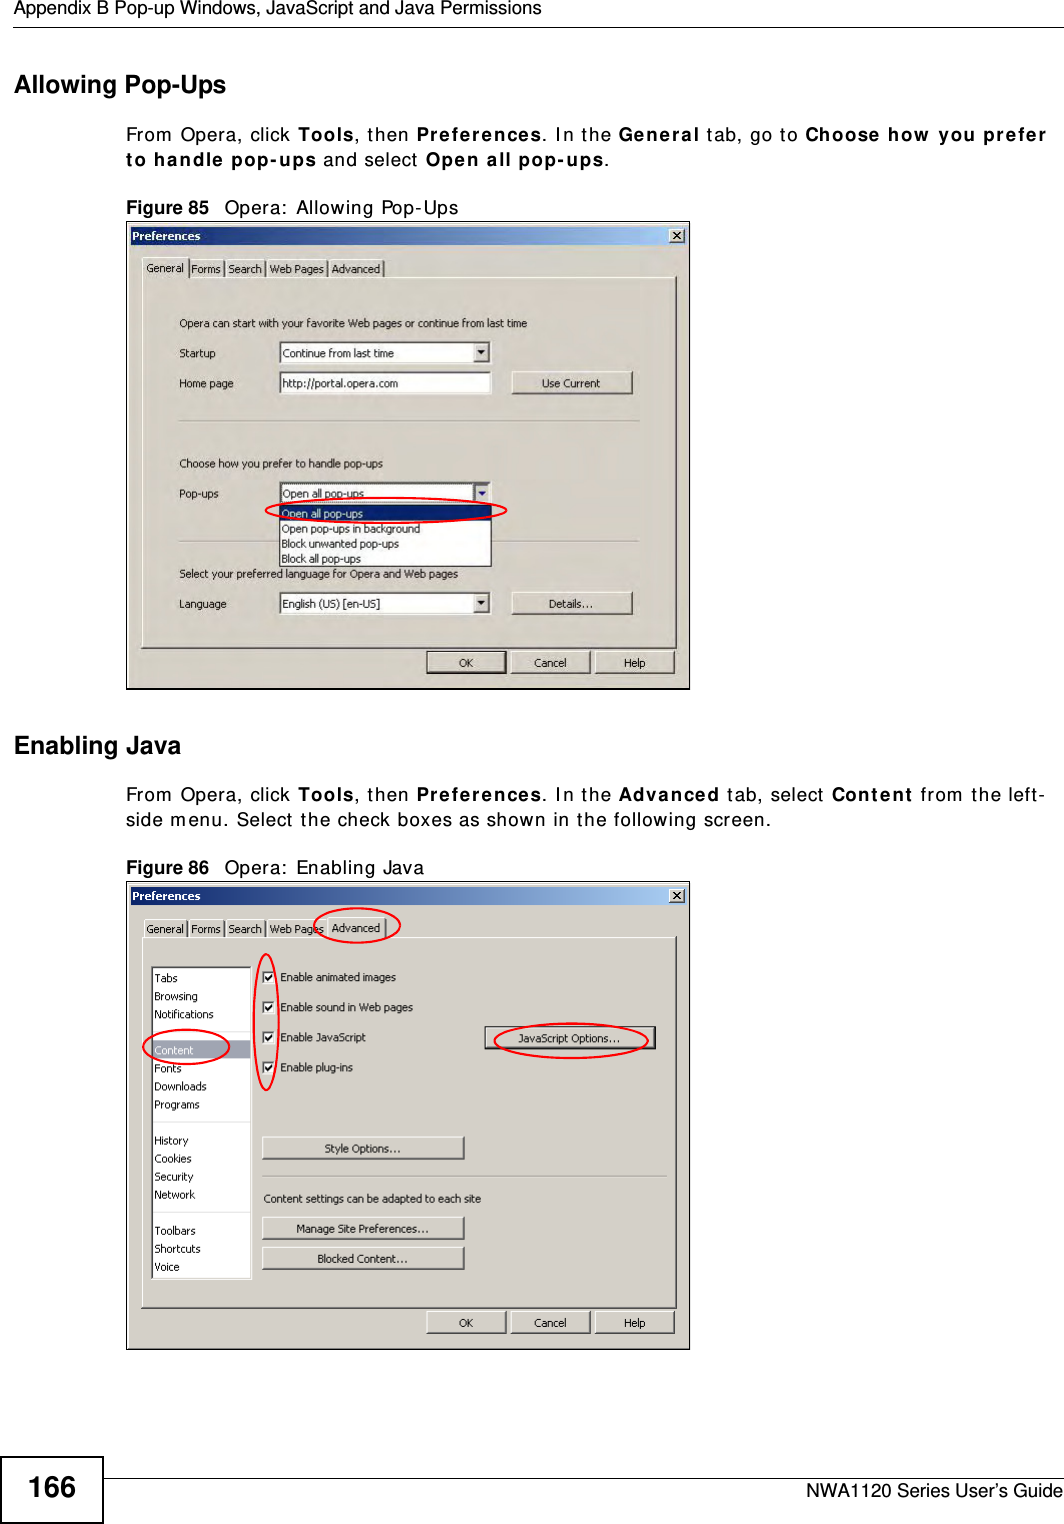 Appendix B Pop-up Windows, JavaScript and Java PermissionsNWA1120 Series User’s Guide166Allowing Pop-UpsFrom Opera, click Tools, then Preferences. In the General tab, go to Choose how you prefer to handle pop-ups and select Open all pop-ups.Figure 85   Opera: Allowing Pop-UpsEnabling JavaFrom Opera, click Tools, then Preferences. In the Advanced tab, select Content from the left-side menu. Select the check boxes as shown in the following screen.Figure 86   Opera: Enabling Java